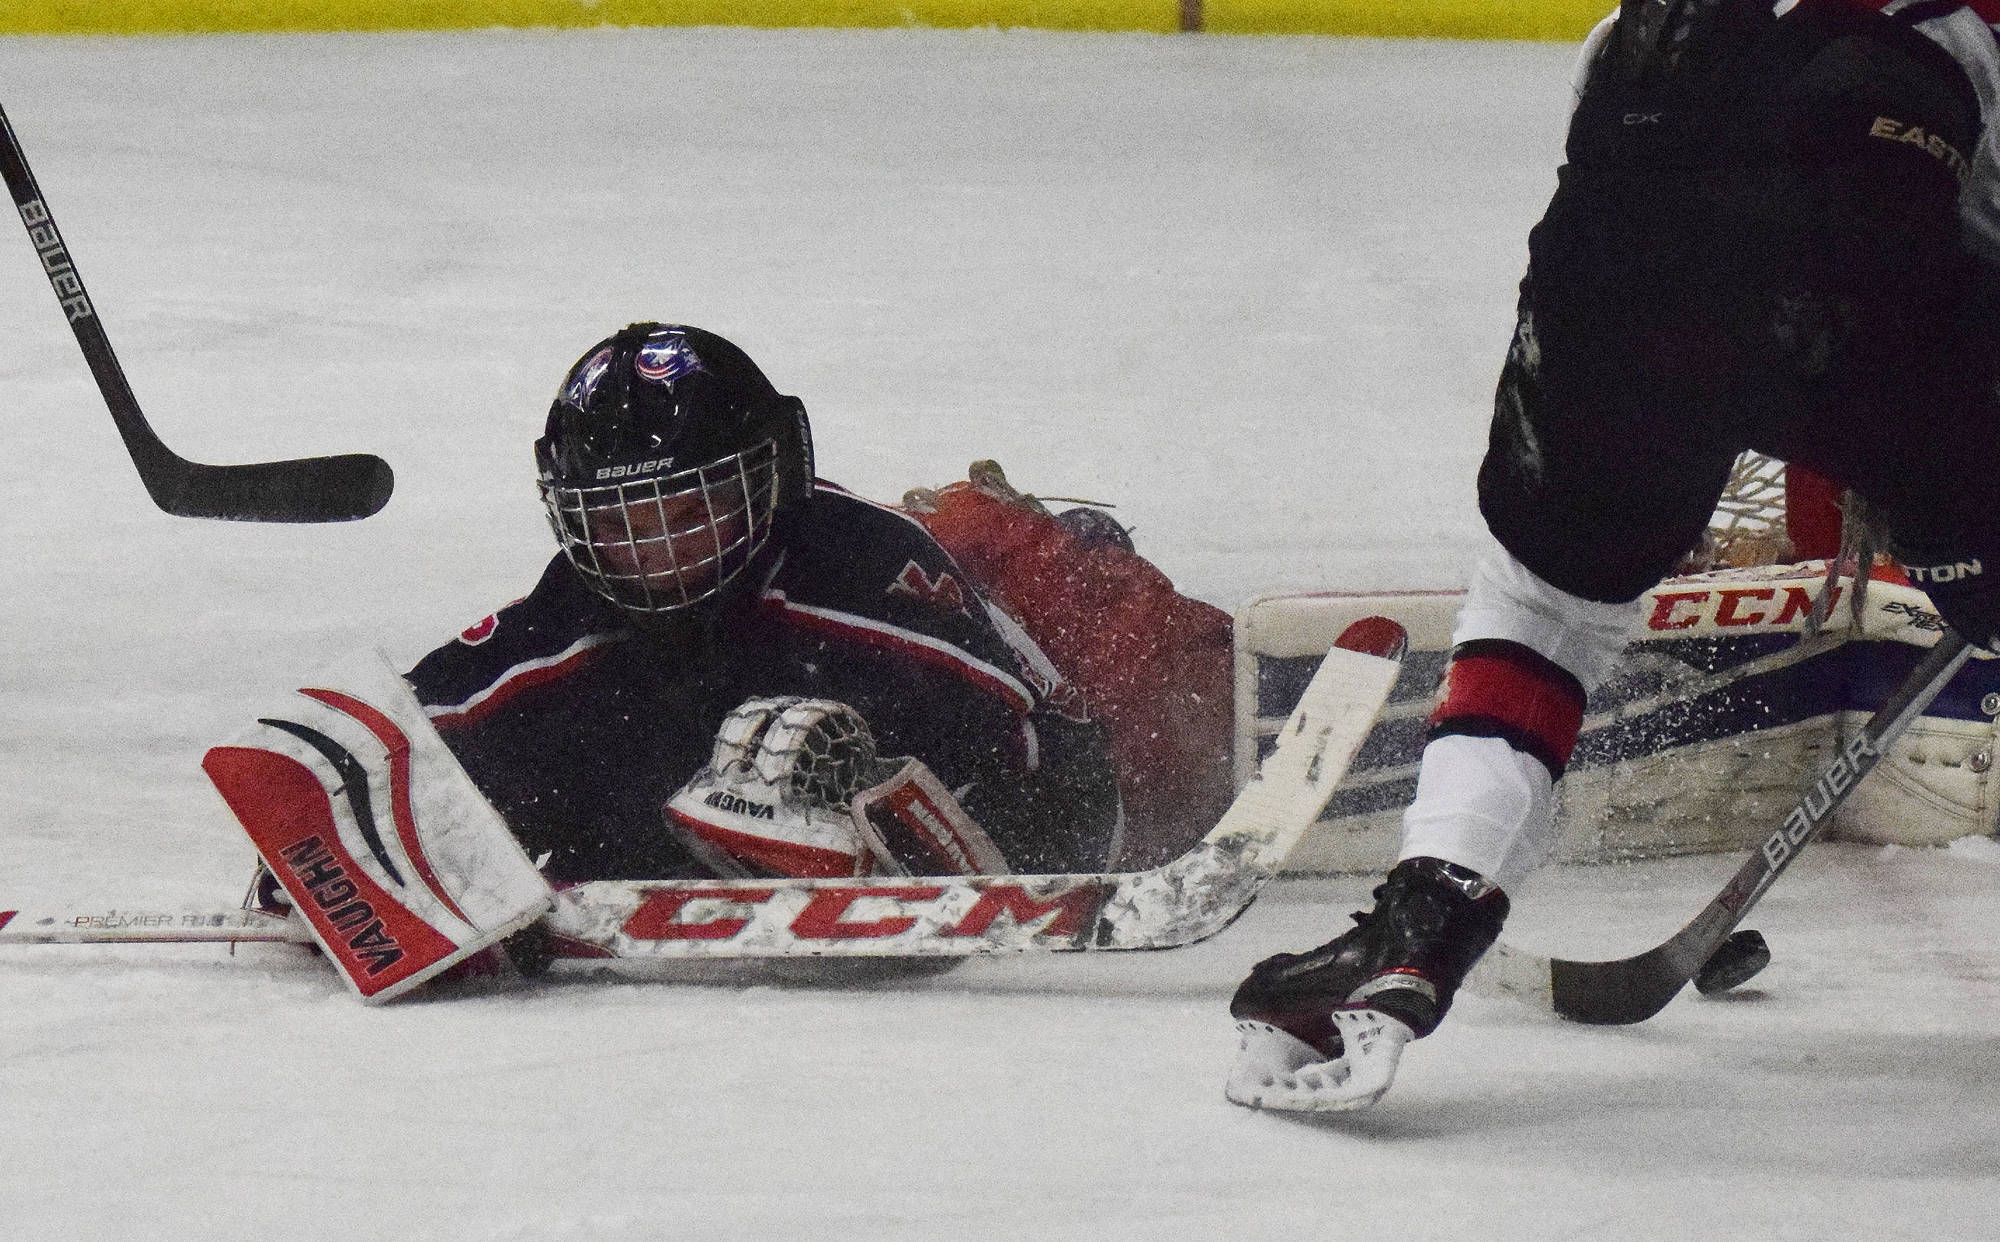 North Pole goalie Moses Halbert spreads out to make a save Thursday night against Kenai Central at the Peninsula Ice Challenge at the Kenai Multi-purpose Facility. (Photo by Joey Klecka/Peninsula Clarion)